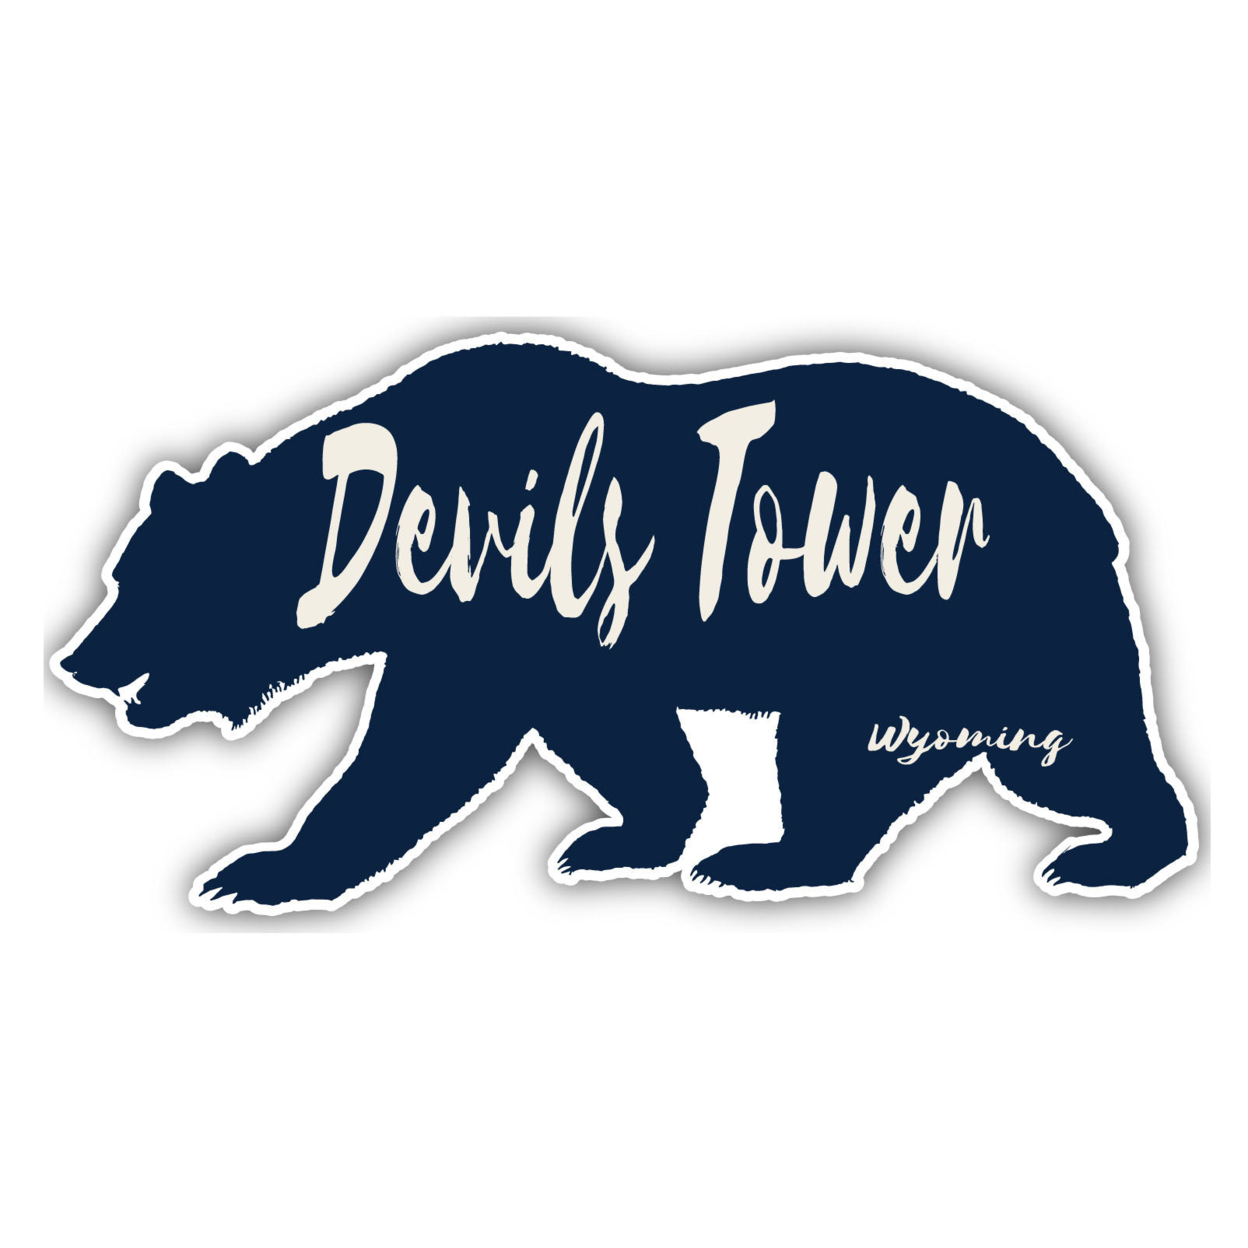 Devils Tower Wyoming Souvenir Decorative Stickers (Choose Theme And Size) - Single Unit, 4-Inch, Tent